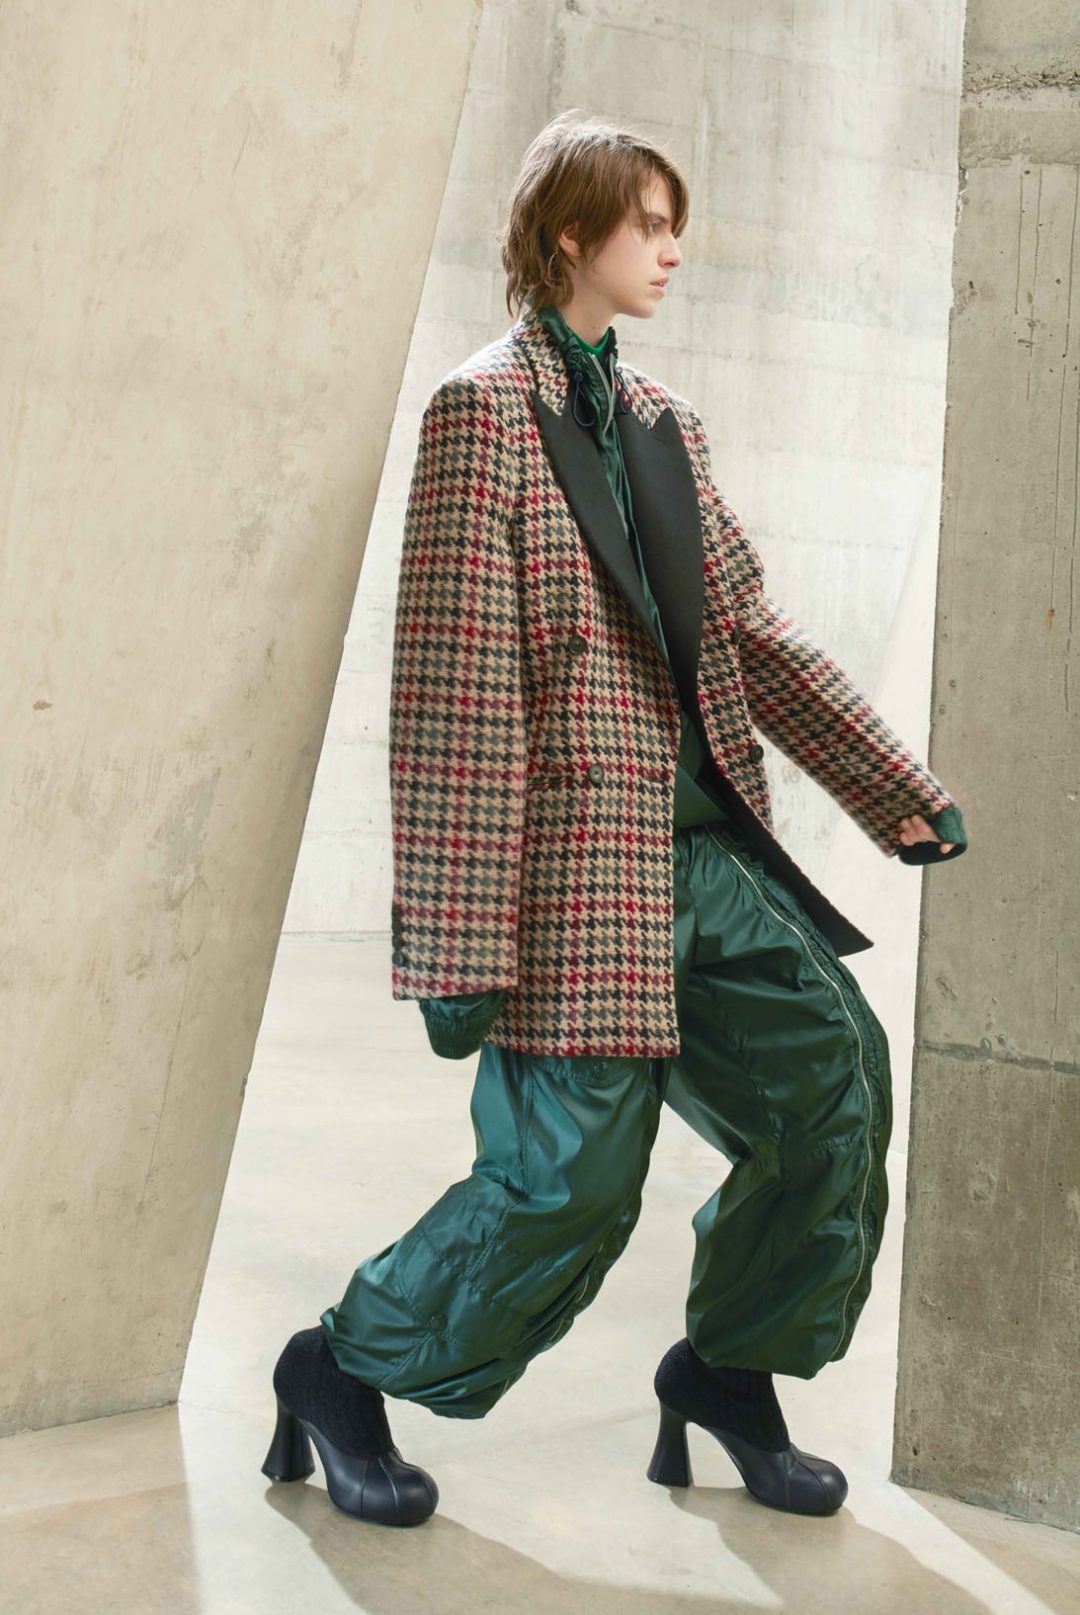 Stella McCartney’s FW21 Collection Spotlights Party Wear and Sustainability